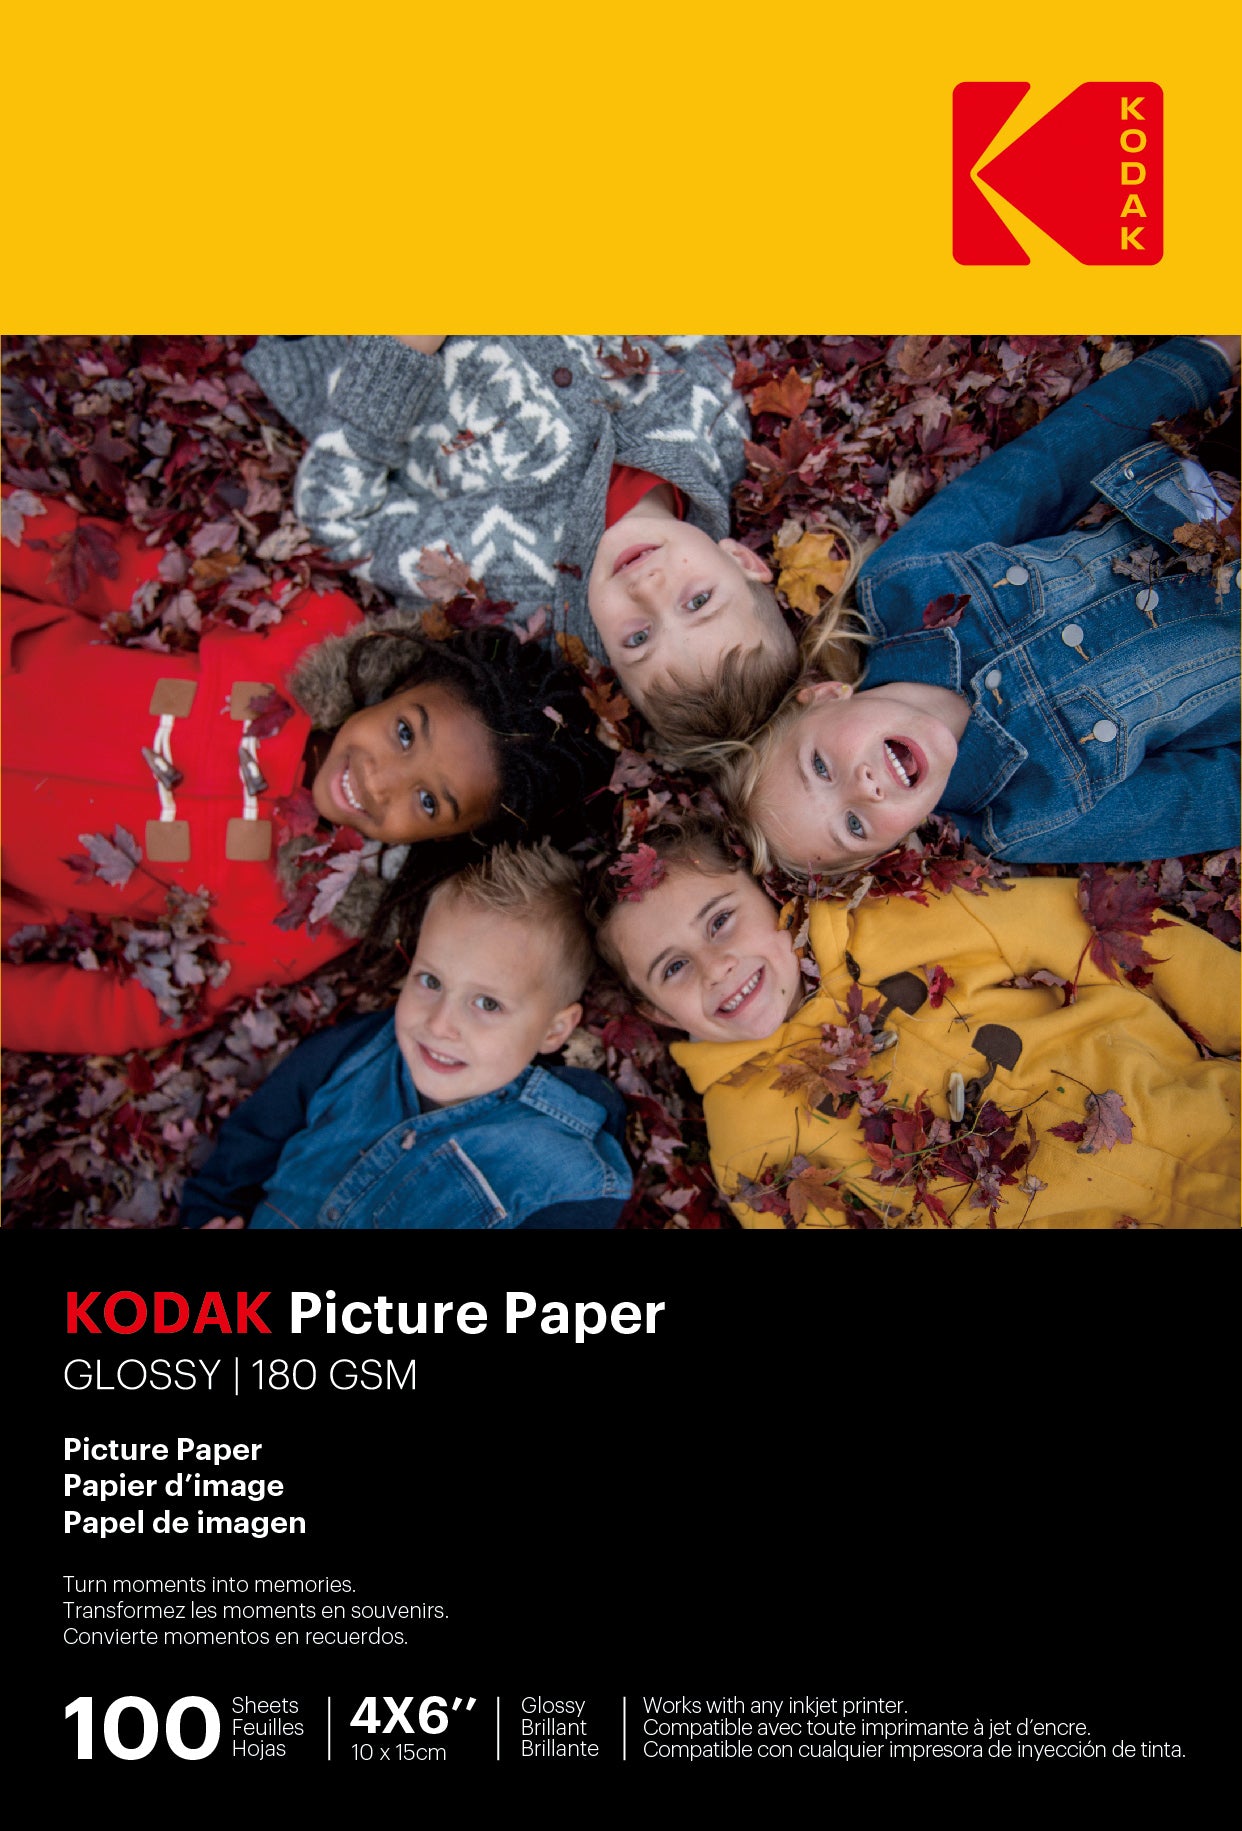 Kodak Picture Paper  Glossy  180 gsm  4R - 4 x 6 "  Size x 100 Sheets